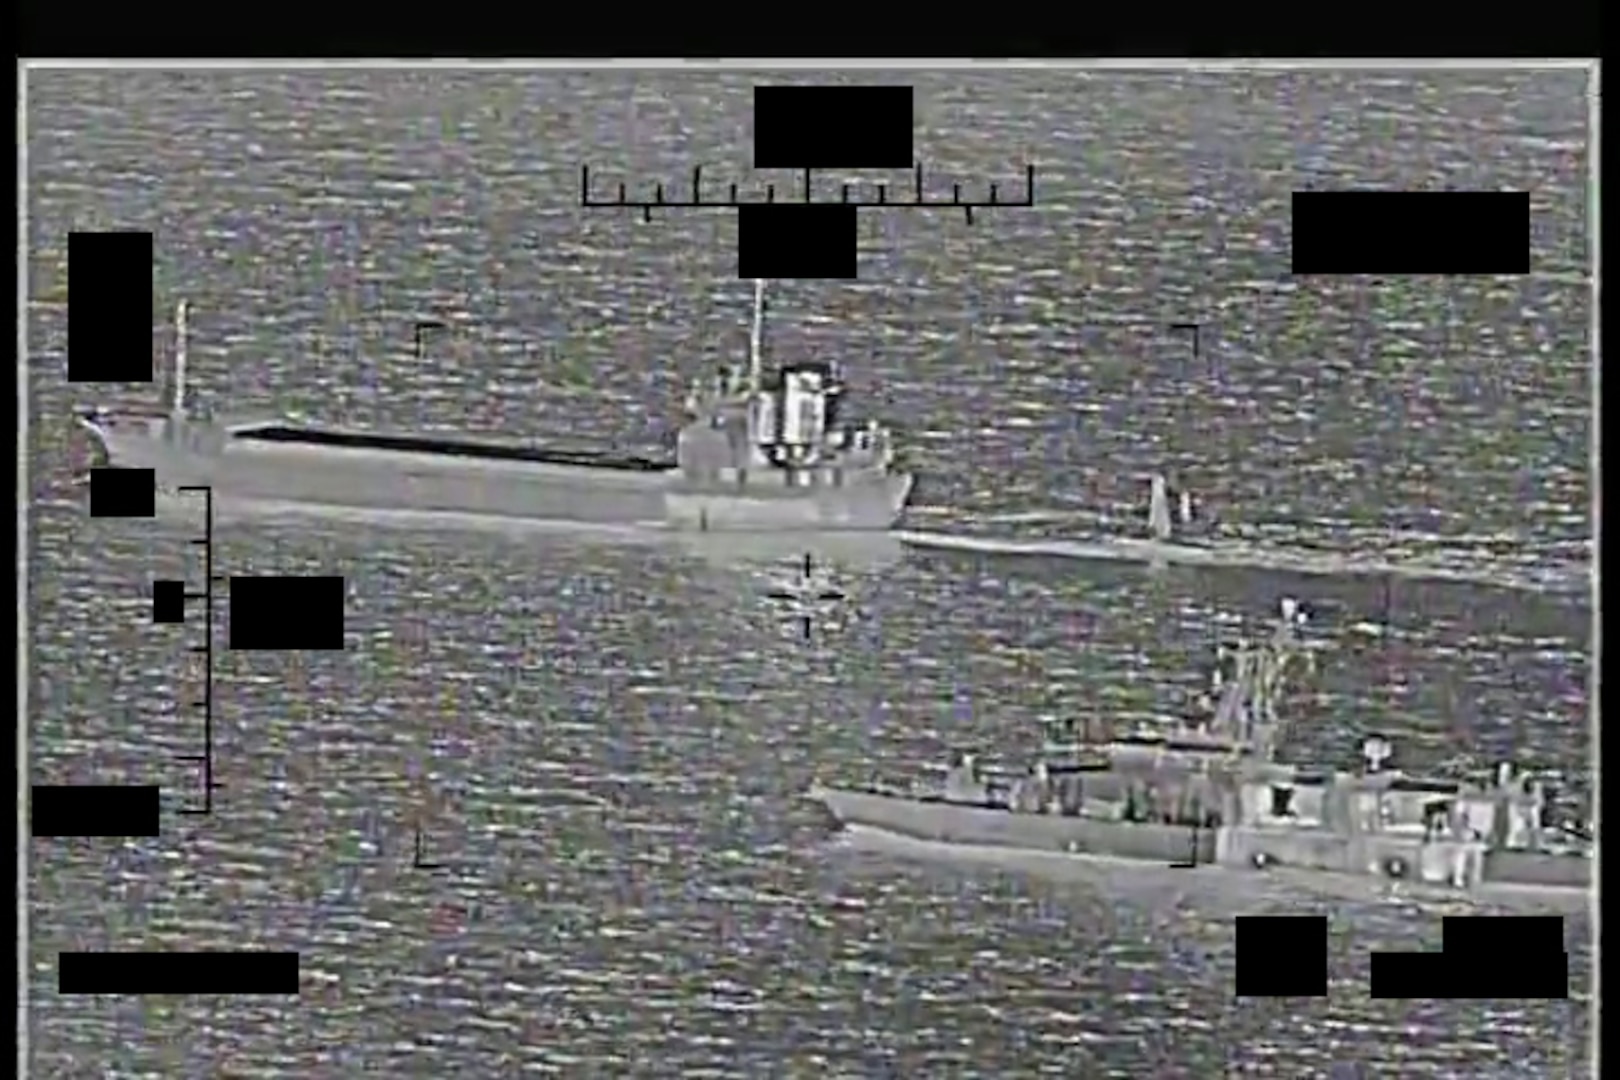 ARABIAN GULF (Aug. 30, 2022) Screenshot of a video showing support ship Shahid Baziar, left, from Iran's Islamic Revolutionary Guard Corps Navy unlawfully towing a Saildrone Explorer unmanned surface vessel in international waters of the Arabian Gulf as U.S. Navy patrol coastal ship USS Thunderbolt (PC 12) approaches in response, Aug. 30.